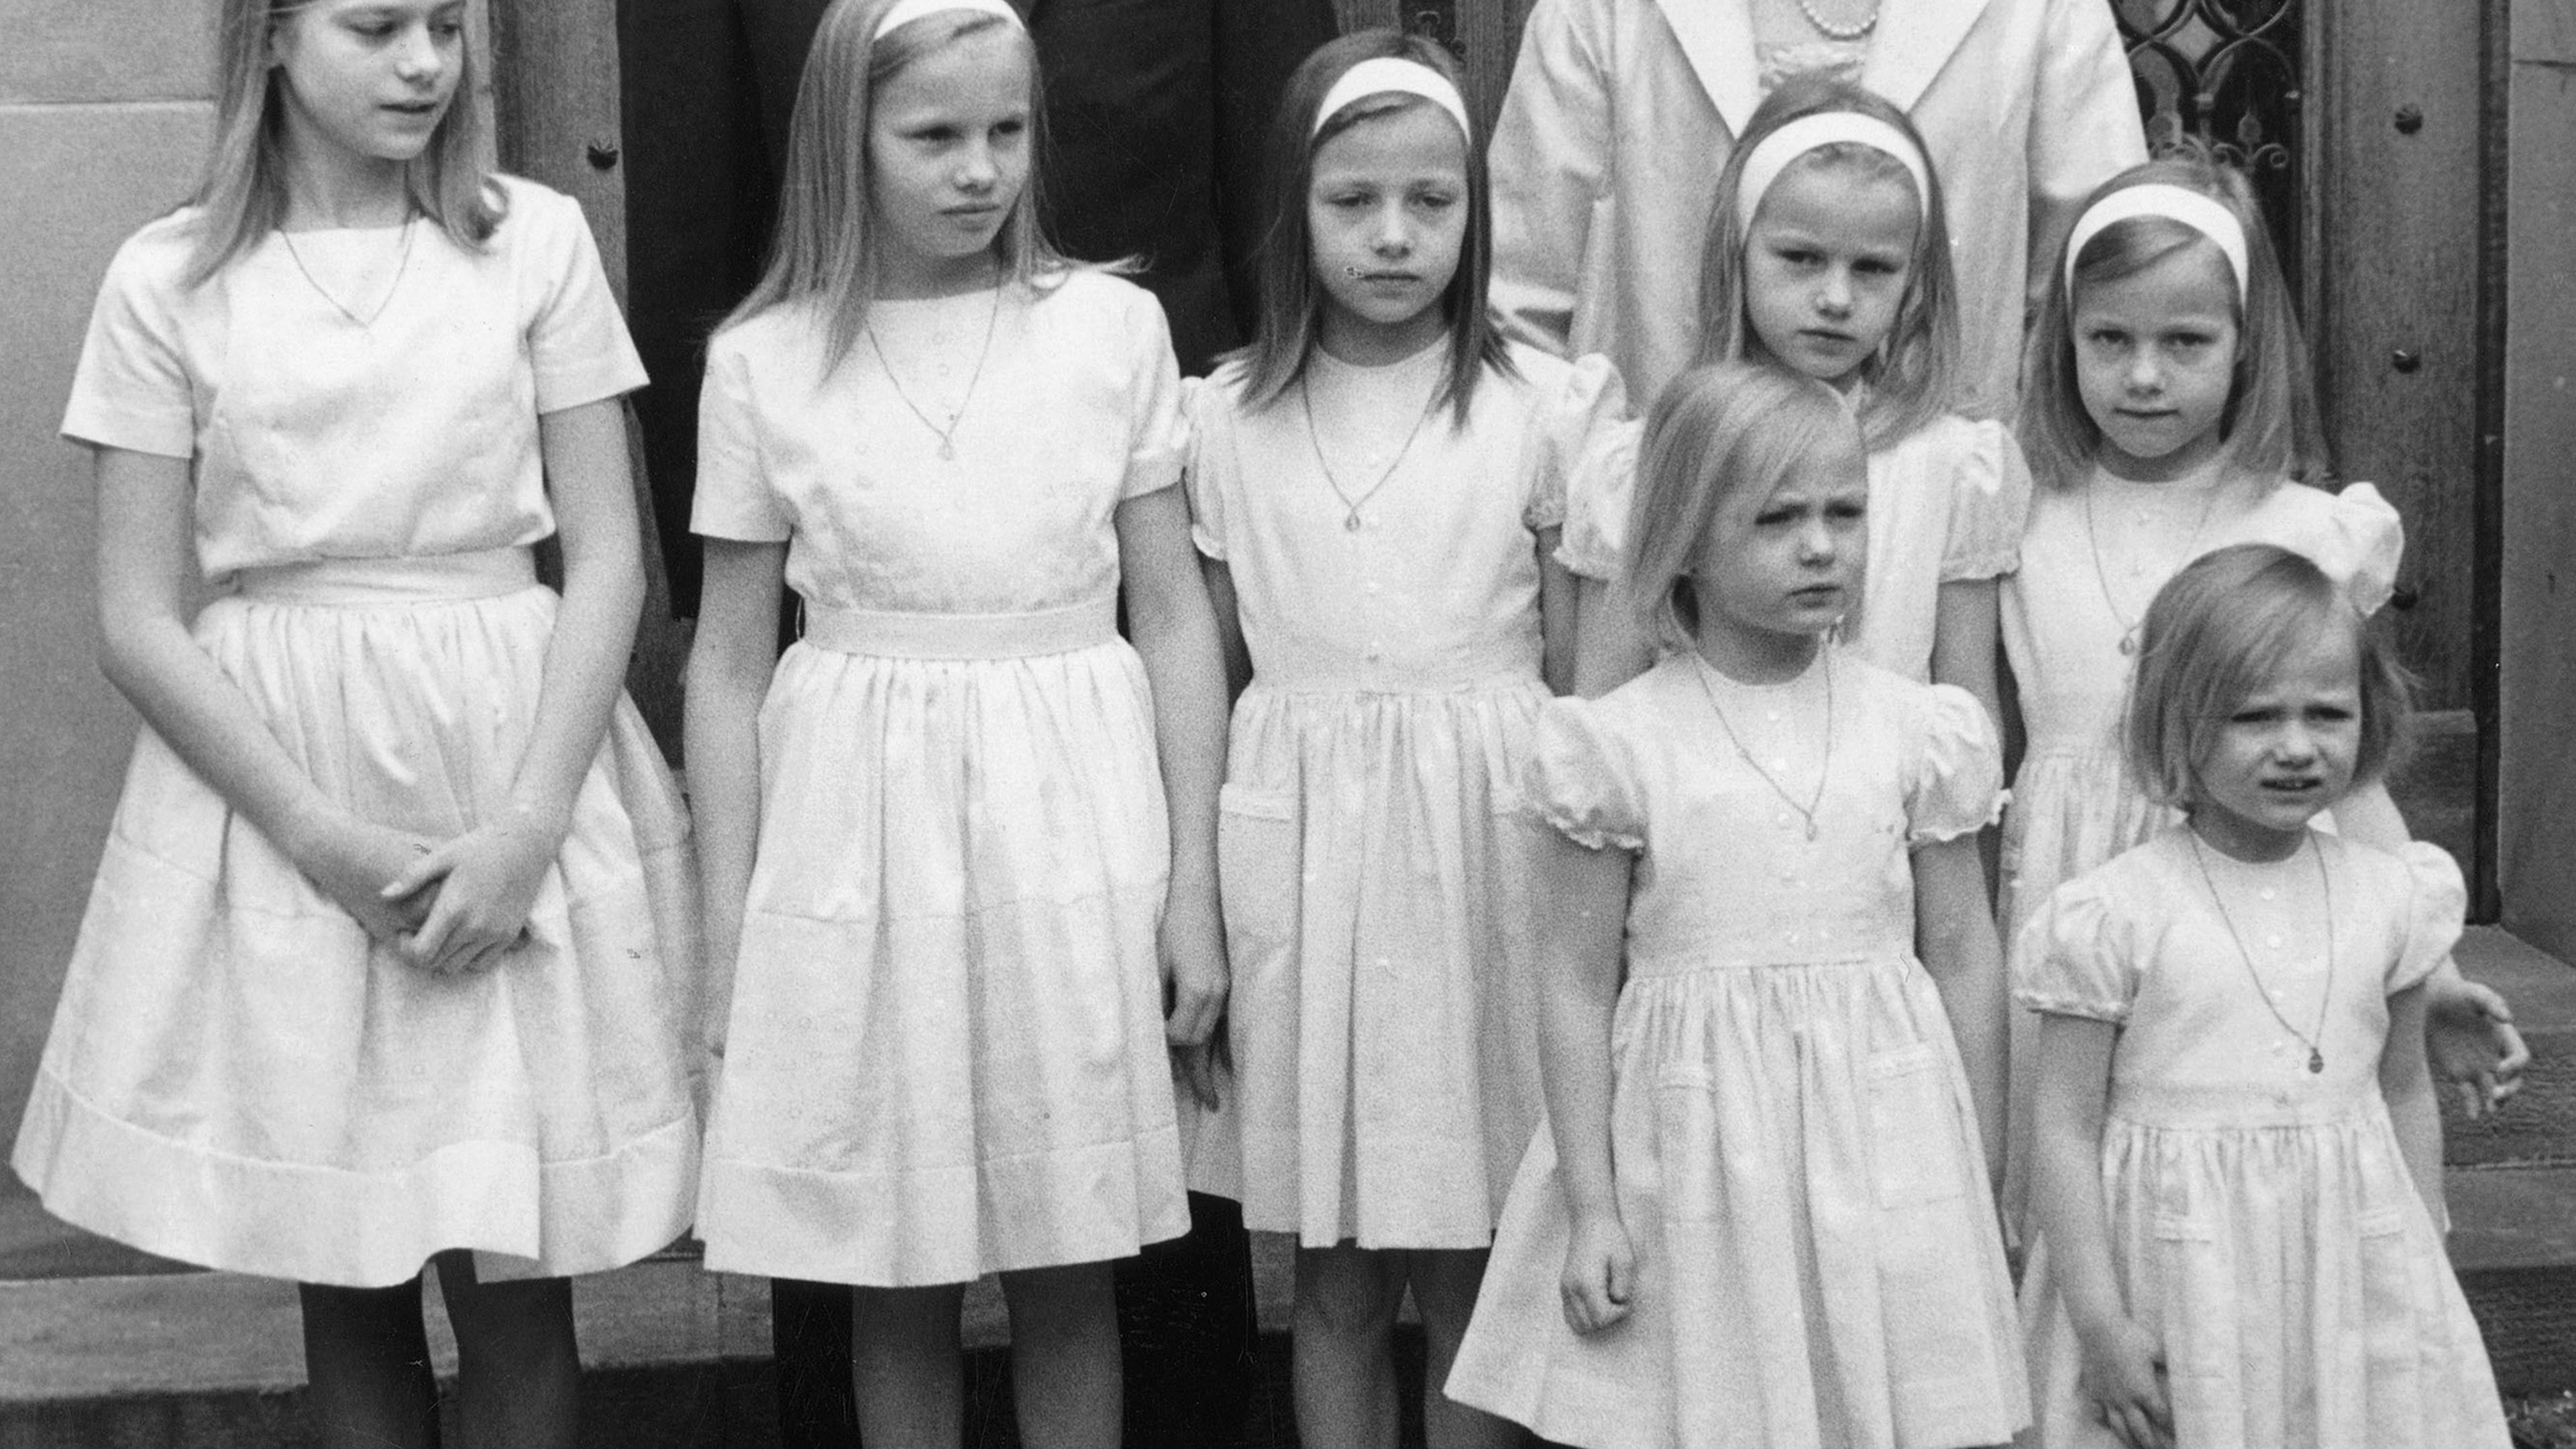 Prince Knud and Princess Marie-Gabrielle with their daughters, Monica, Lydia, Veronica, Sylvia, Camilla, Tatiana and Antonia on April 1966